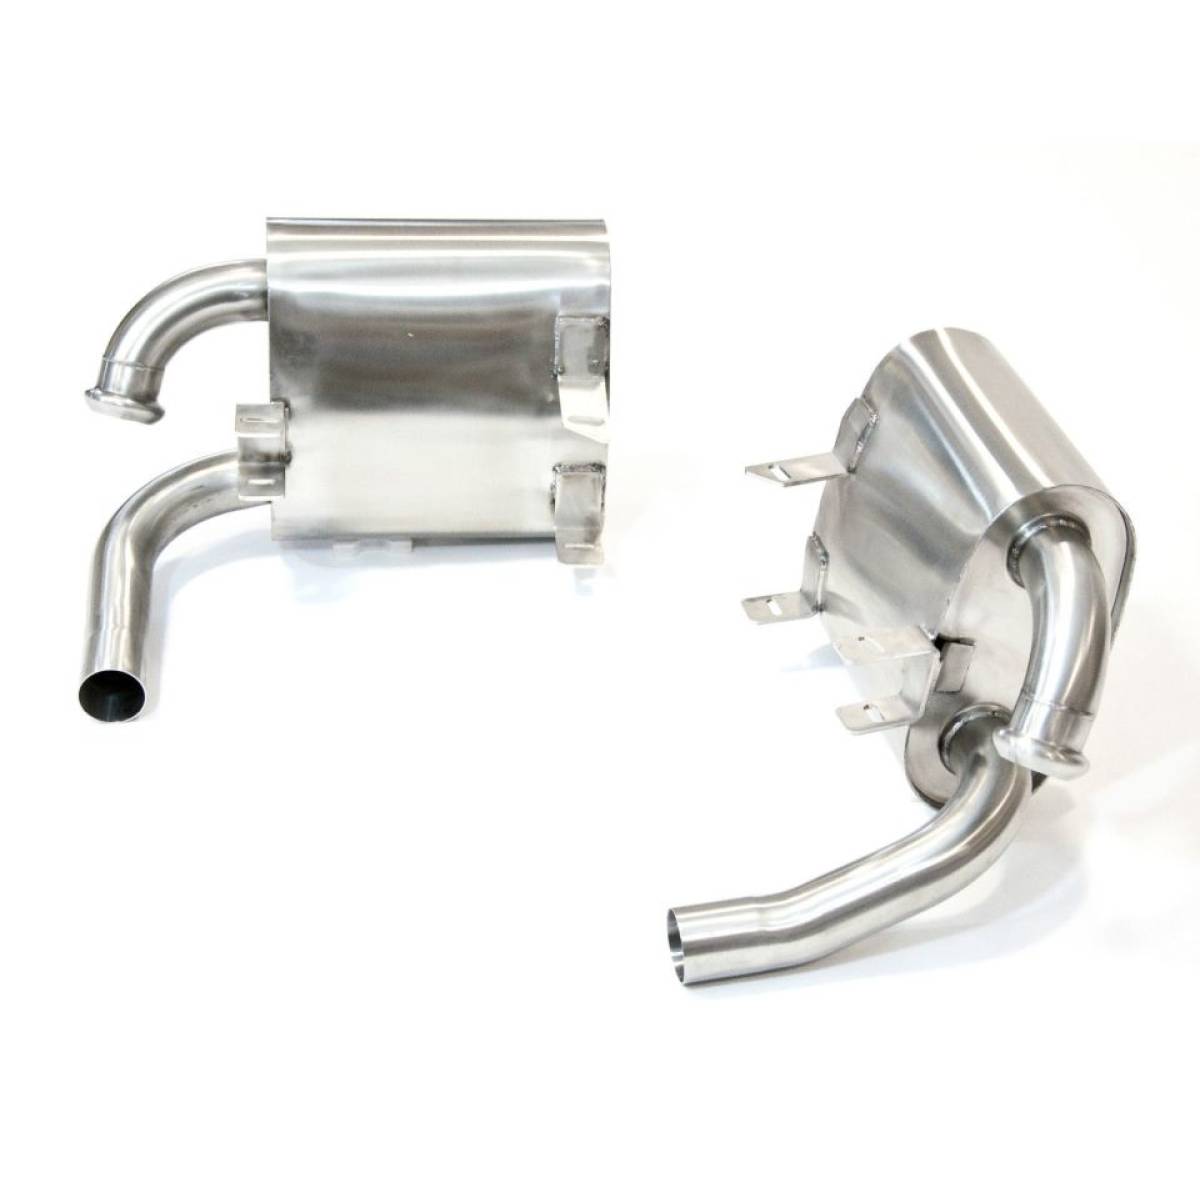 PORSCHE 911 996 CARRERA REAR SECTION BACK BOXES MUFFLERS/SILENCERS Pipe Dynamics Performance Exhaust